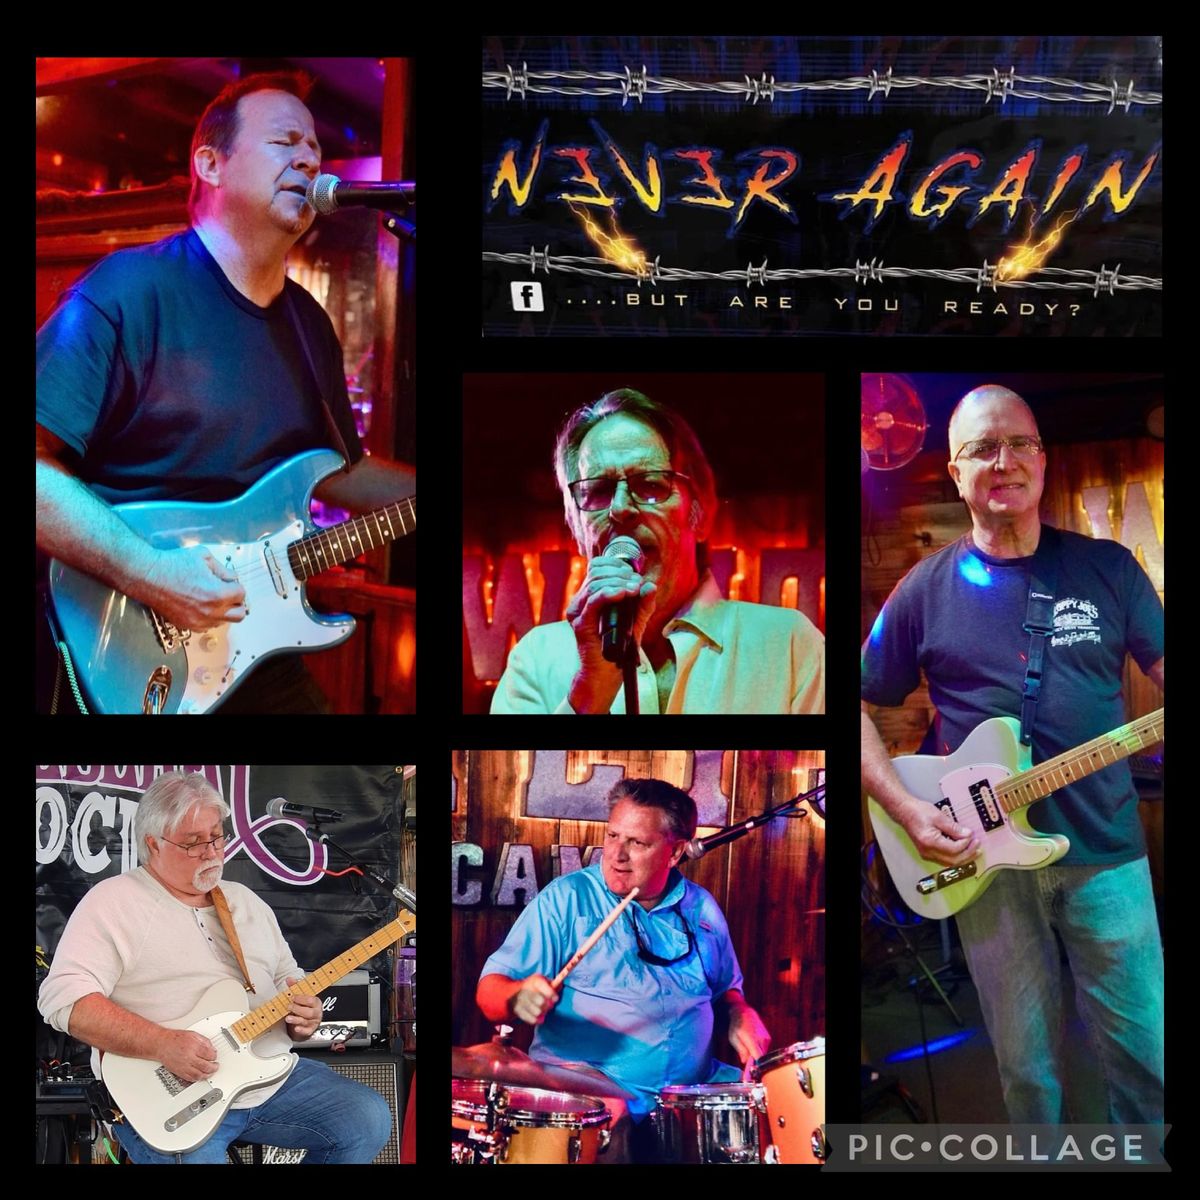 The Never Again Band @ Cheers